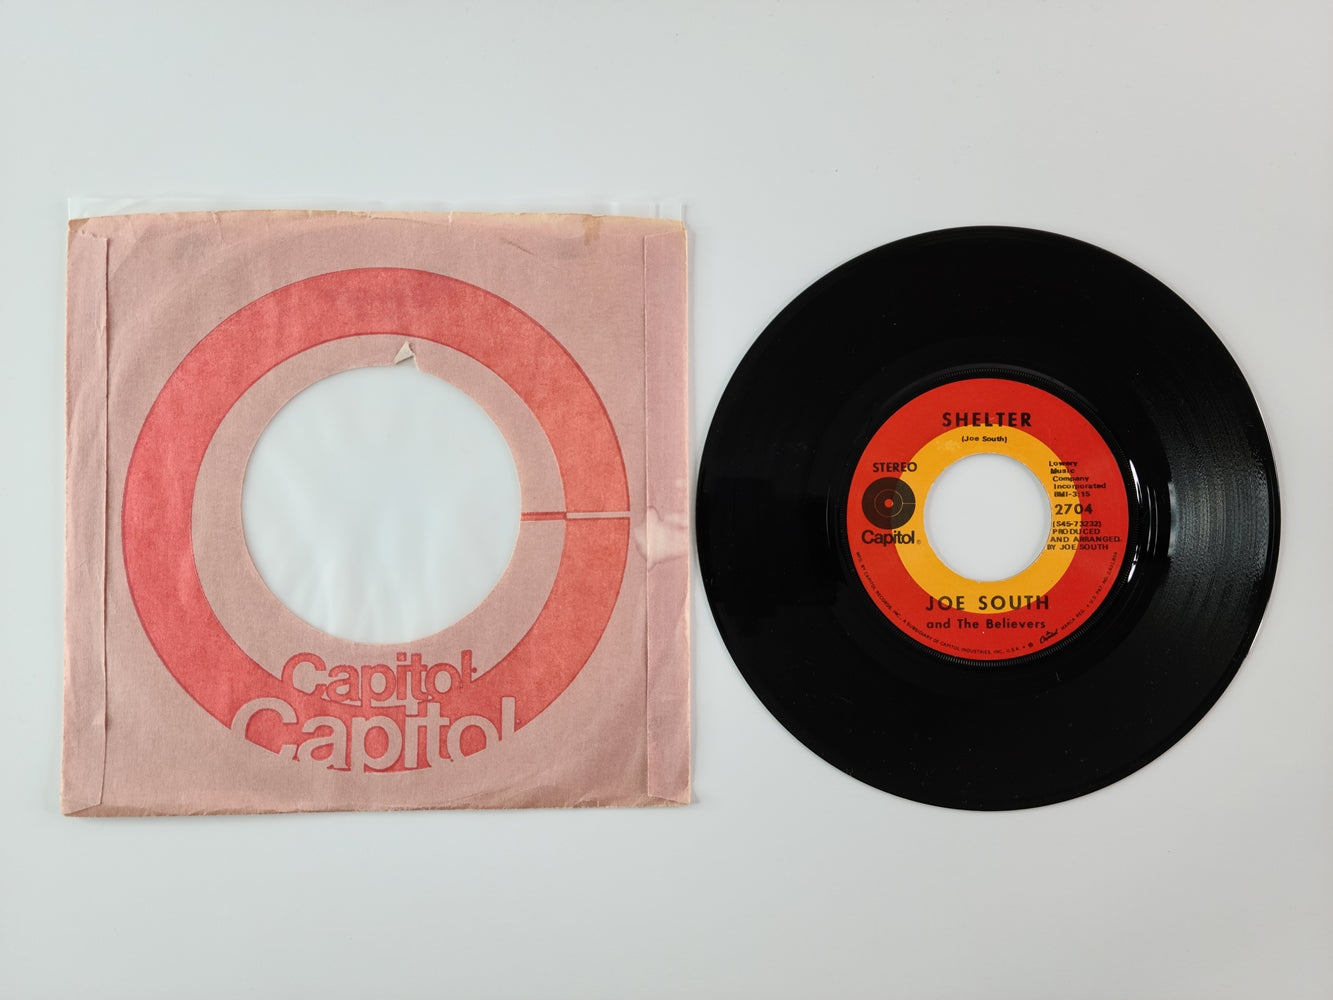 Joe South and the Believers - Walk a Mile in My Shoes / Shelter (1969, 7'' Single)